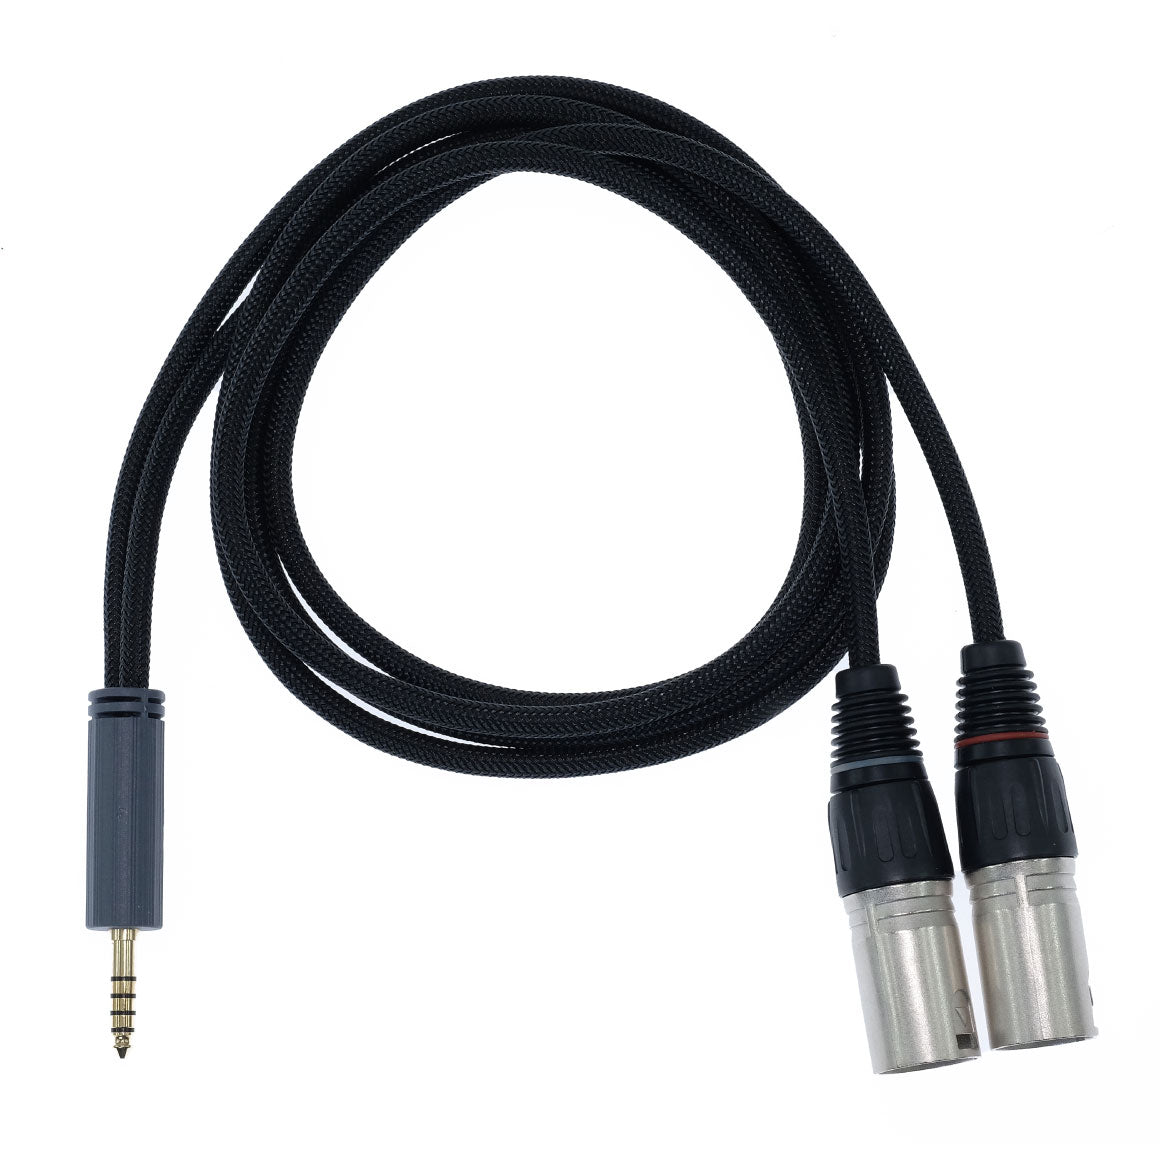 iFi Audio - Standard Edition 4.4mm to XLR Cable (Unboxed)